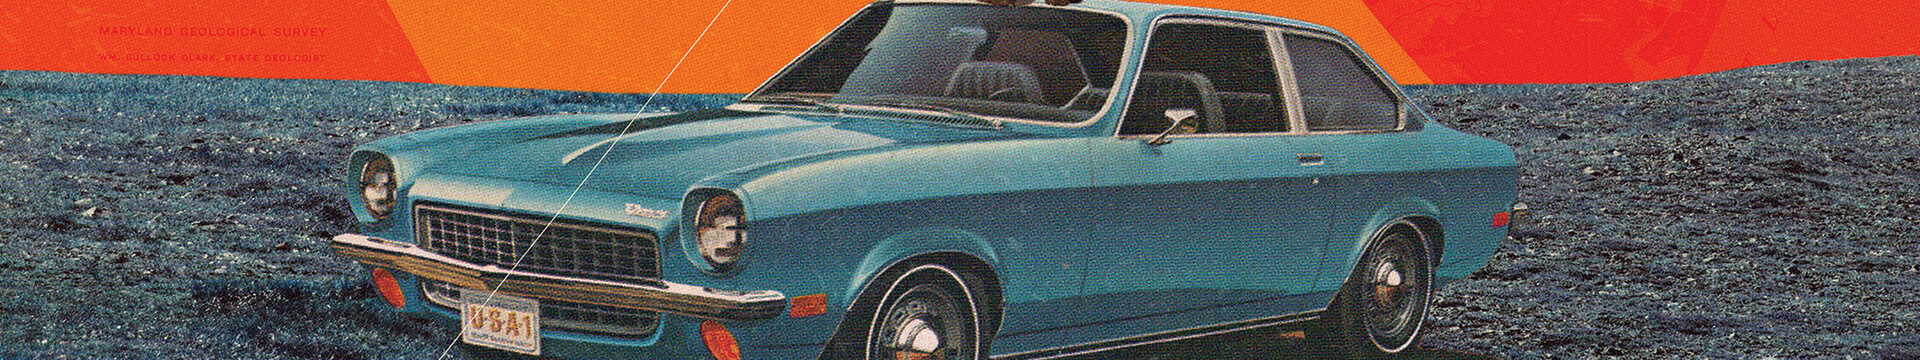 Zoomed in view of old car on vintage car artwork poster. Car is sitting on blue grass with bright red and orange sky in the background.